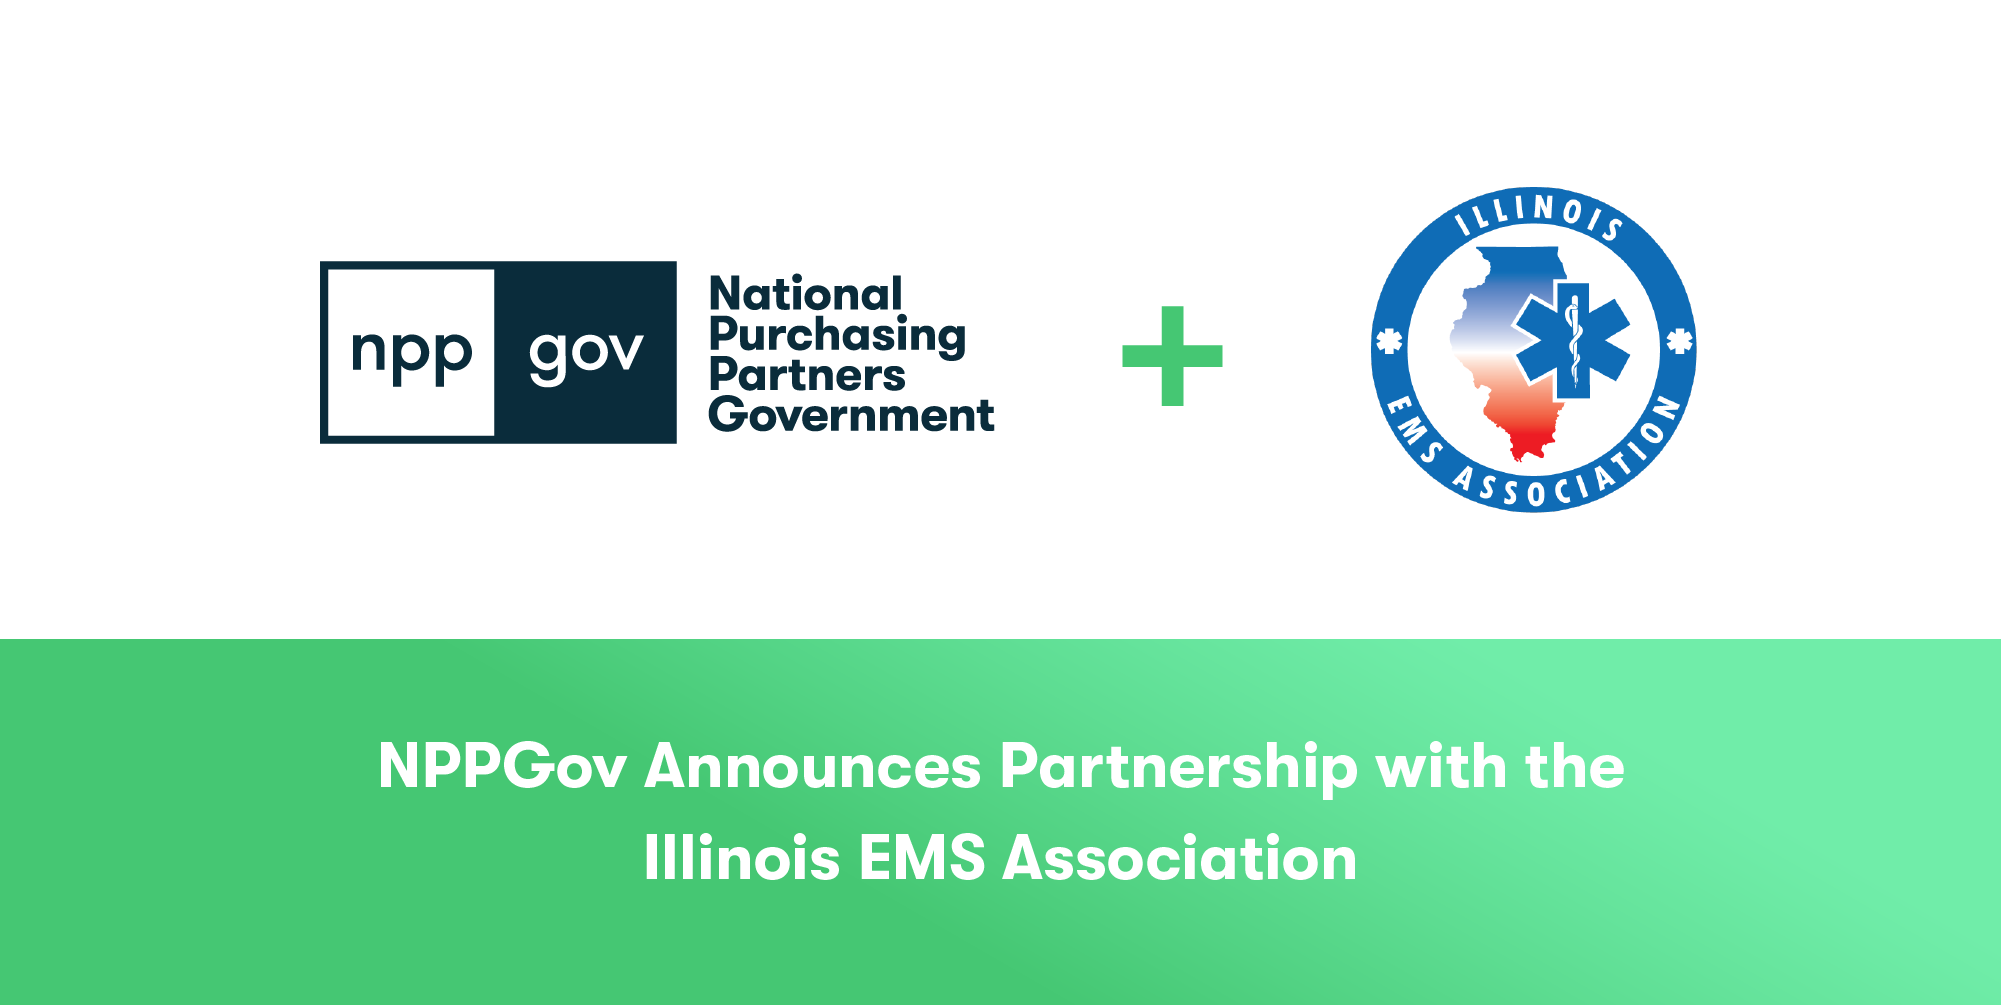 NPPGov Public Safety GPO Partners With The Illinois EMS Association